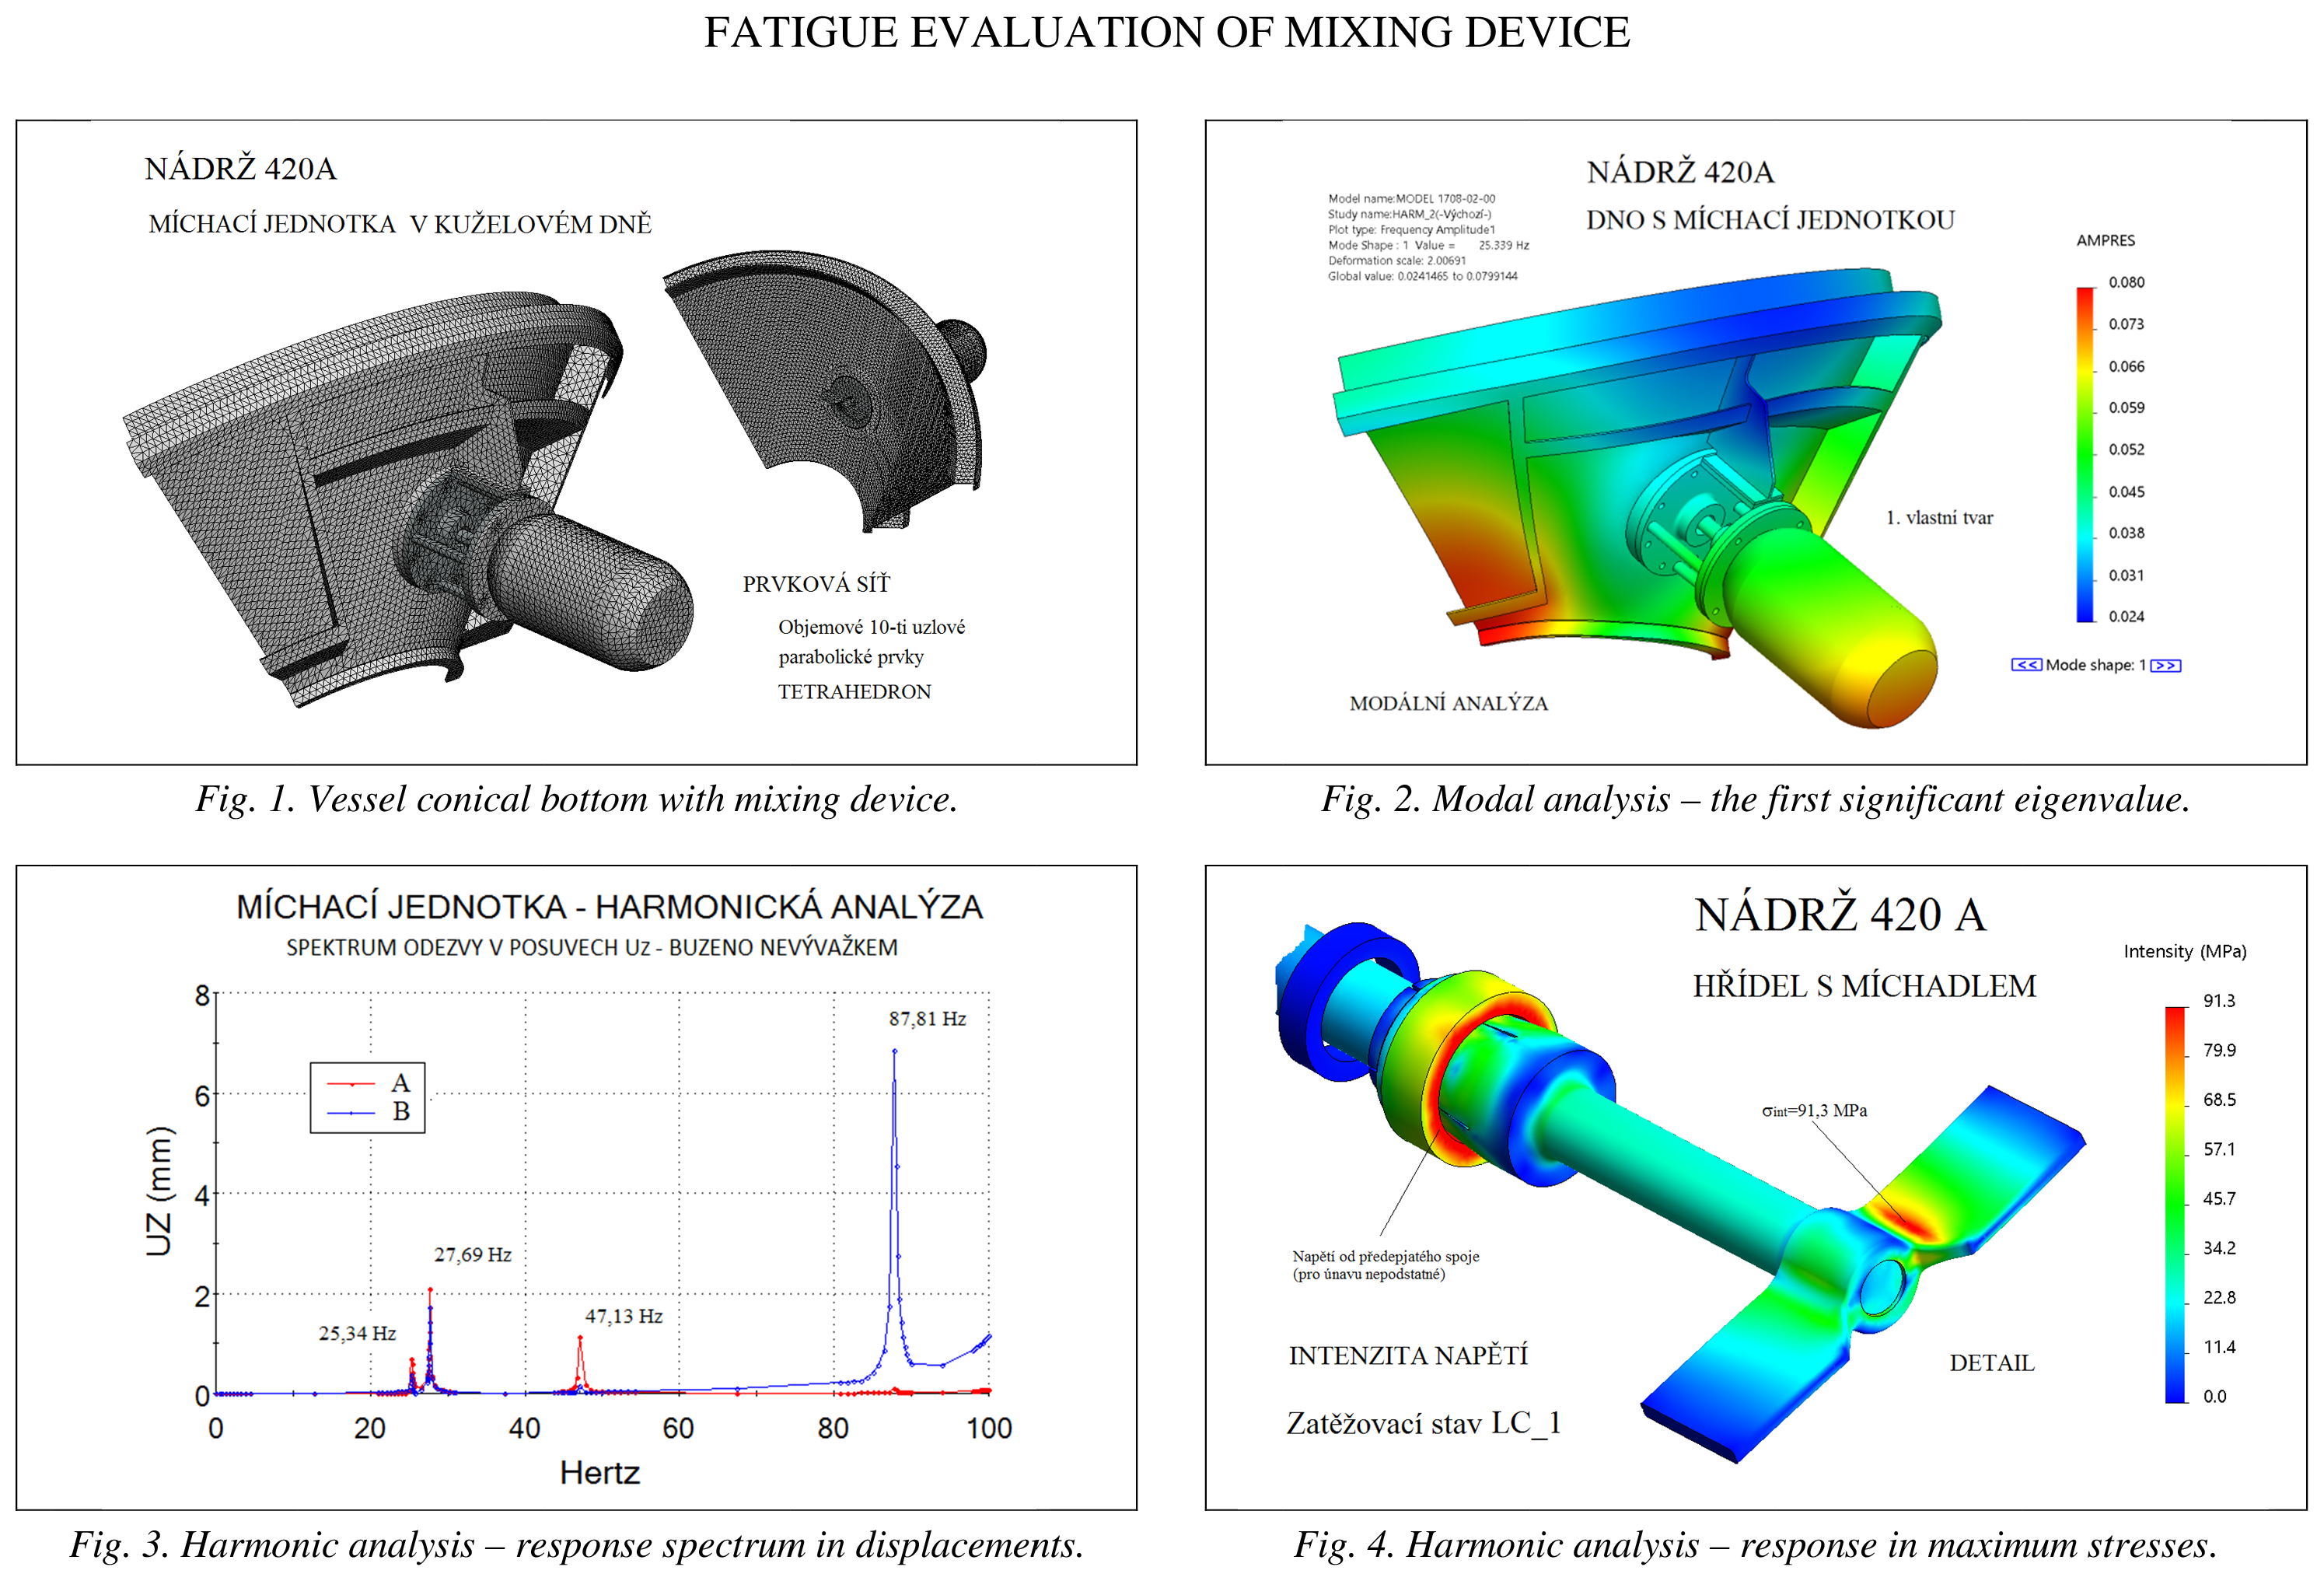 Fatigue evaluation of mixing device